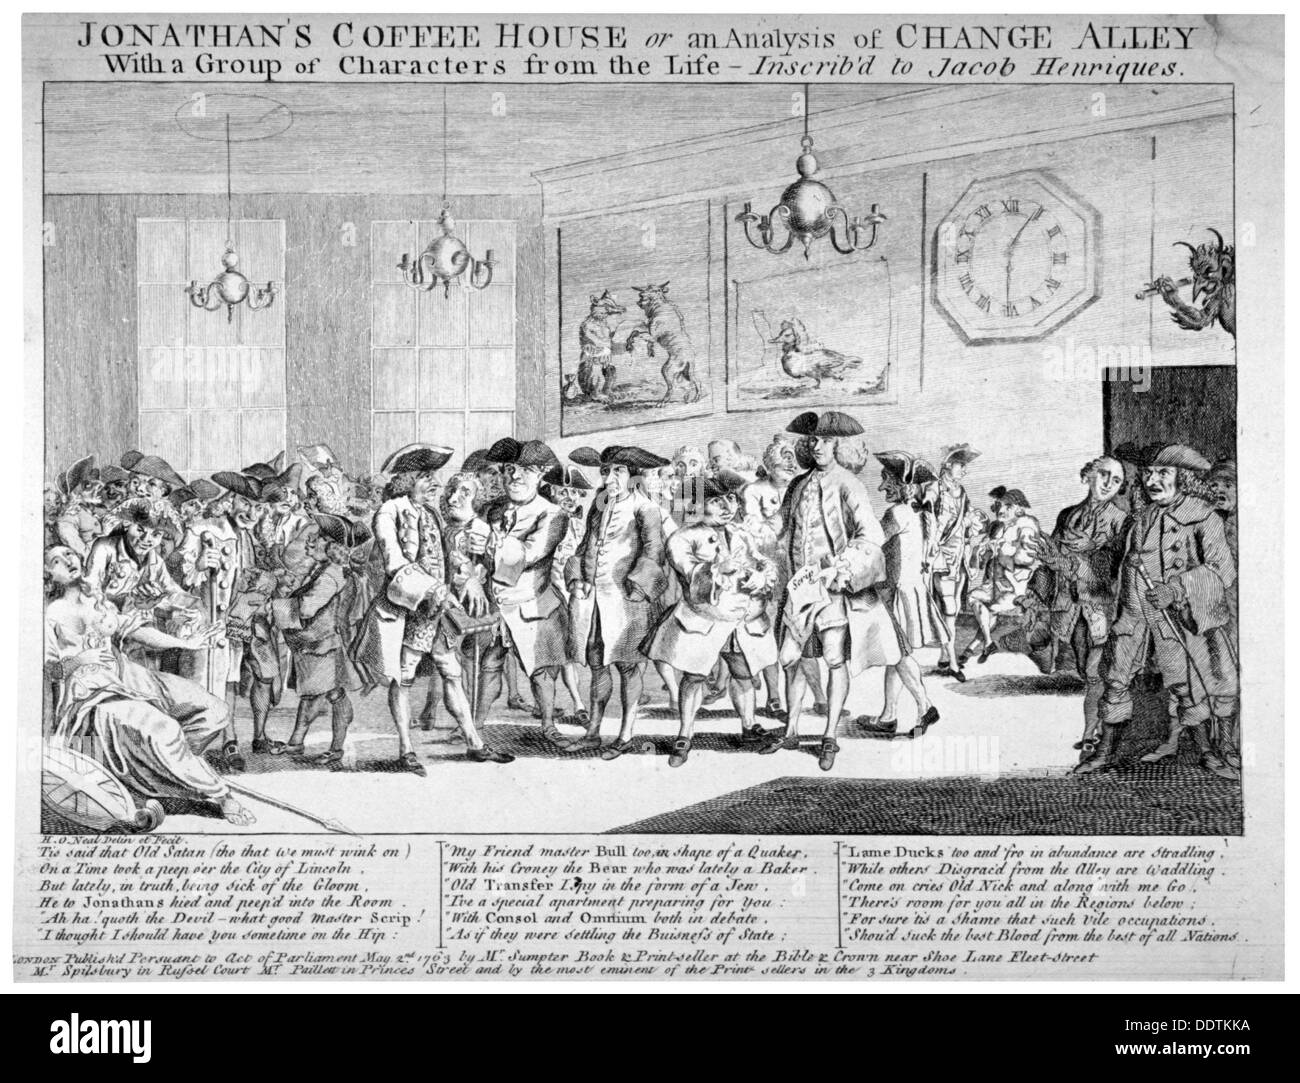 Jonathan's Coffee House, Londres, 1763. Artiste : HO Neal Banque D'Images